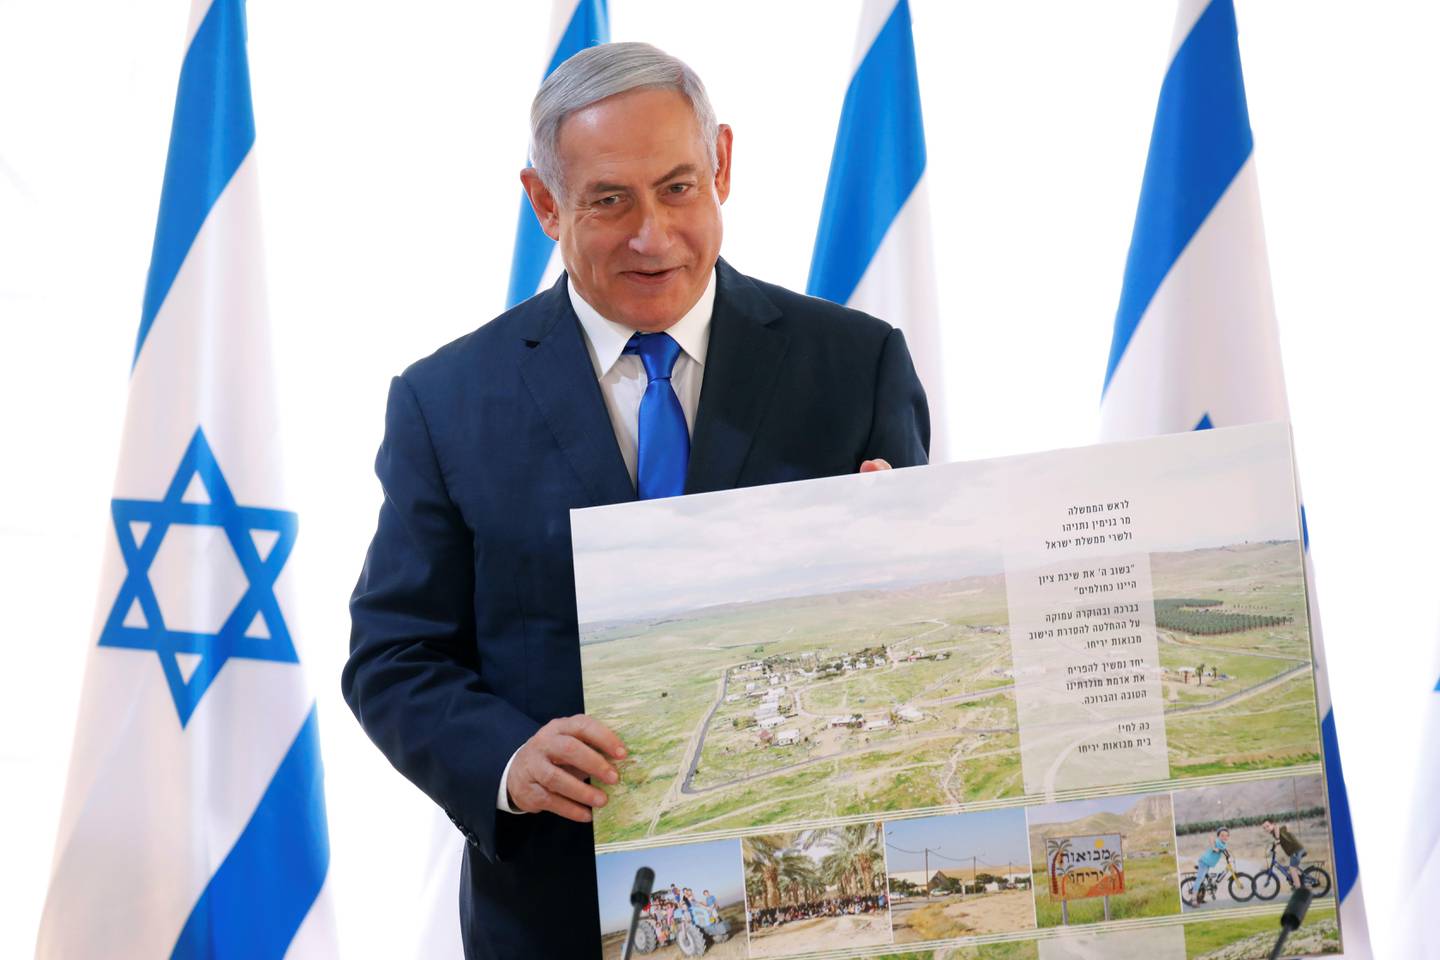 Israeli Prime Minister Benjamin Netanyahu holds up a placard given to him as a gift from Israeli residents of the area, at the start of a weekly cabinet meeting being held in a makeshift tent in the Jordan Valley, in the Israeli-occupied West Bank, Sunday, Sept. 15, 2019. Netanyahu convened his final pre-election cabinet meeting in a part of the West Bank that he's vowed to annex if re-elected. National elections are on Tuesday. (Amir Cohen/Pool via AP)